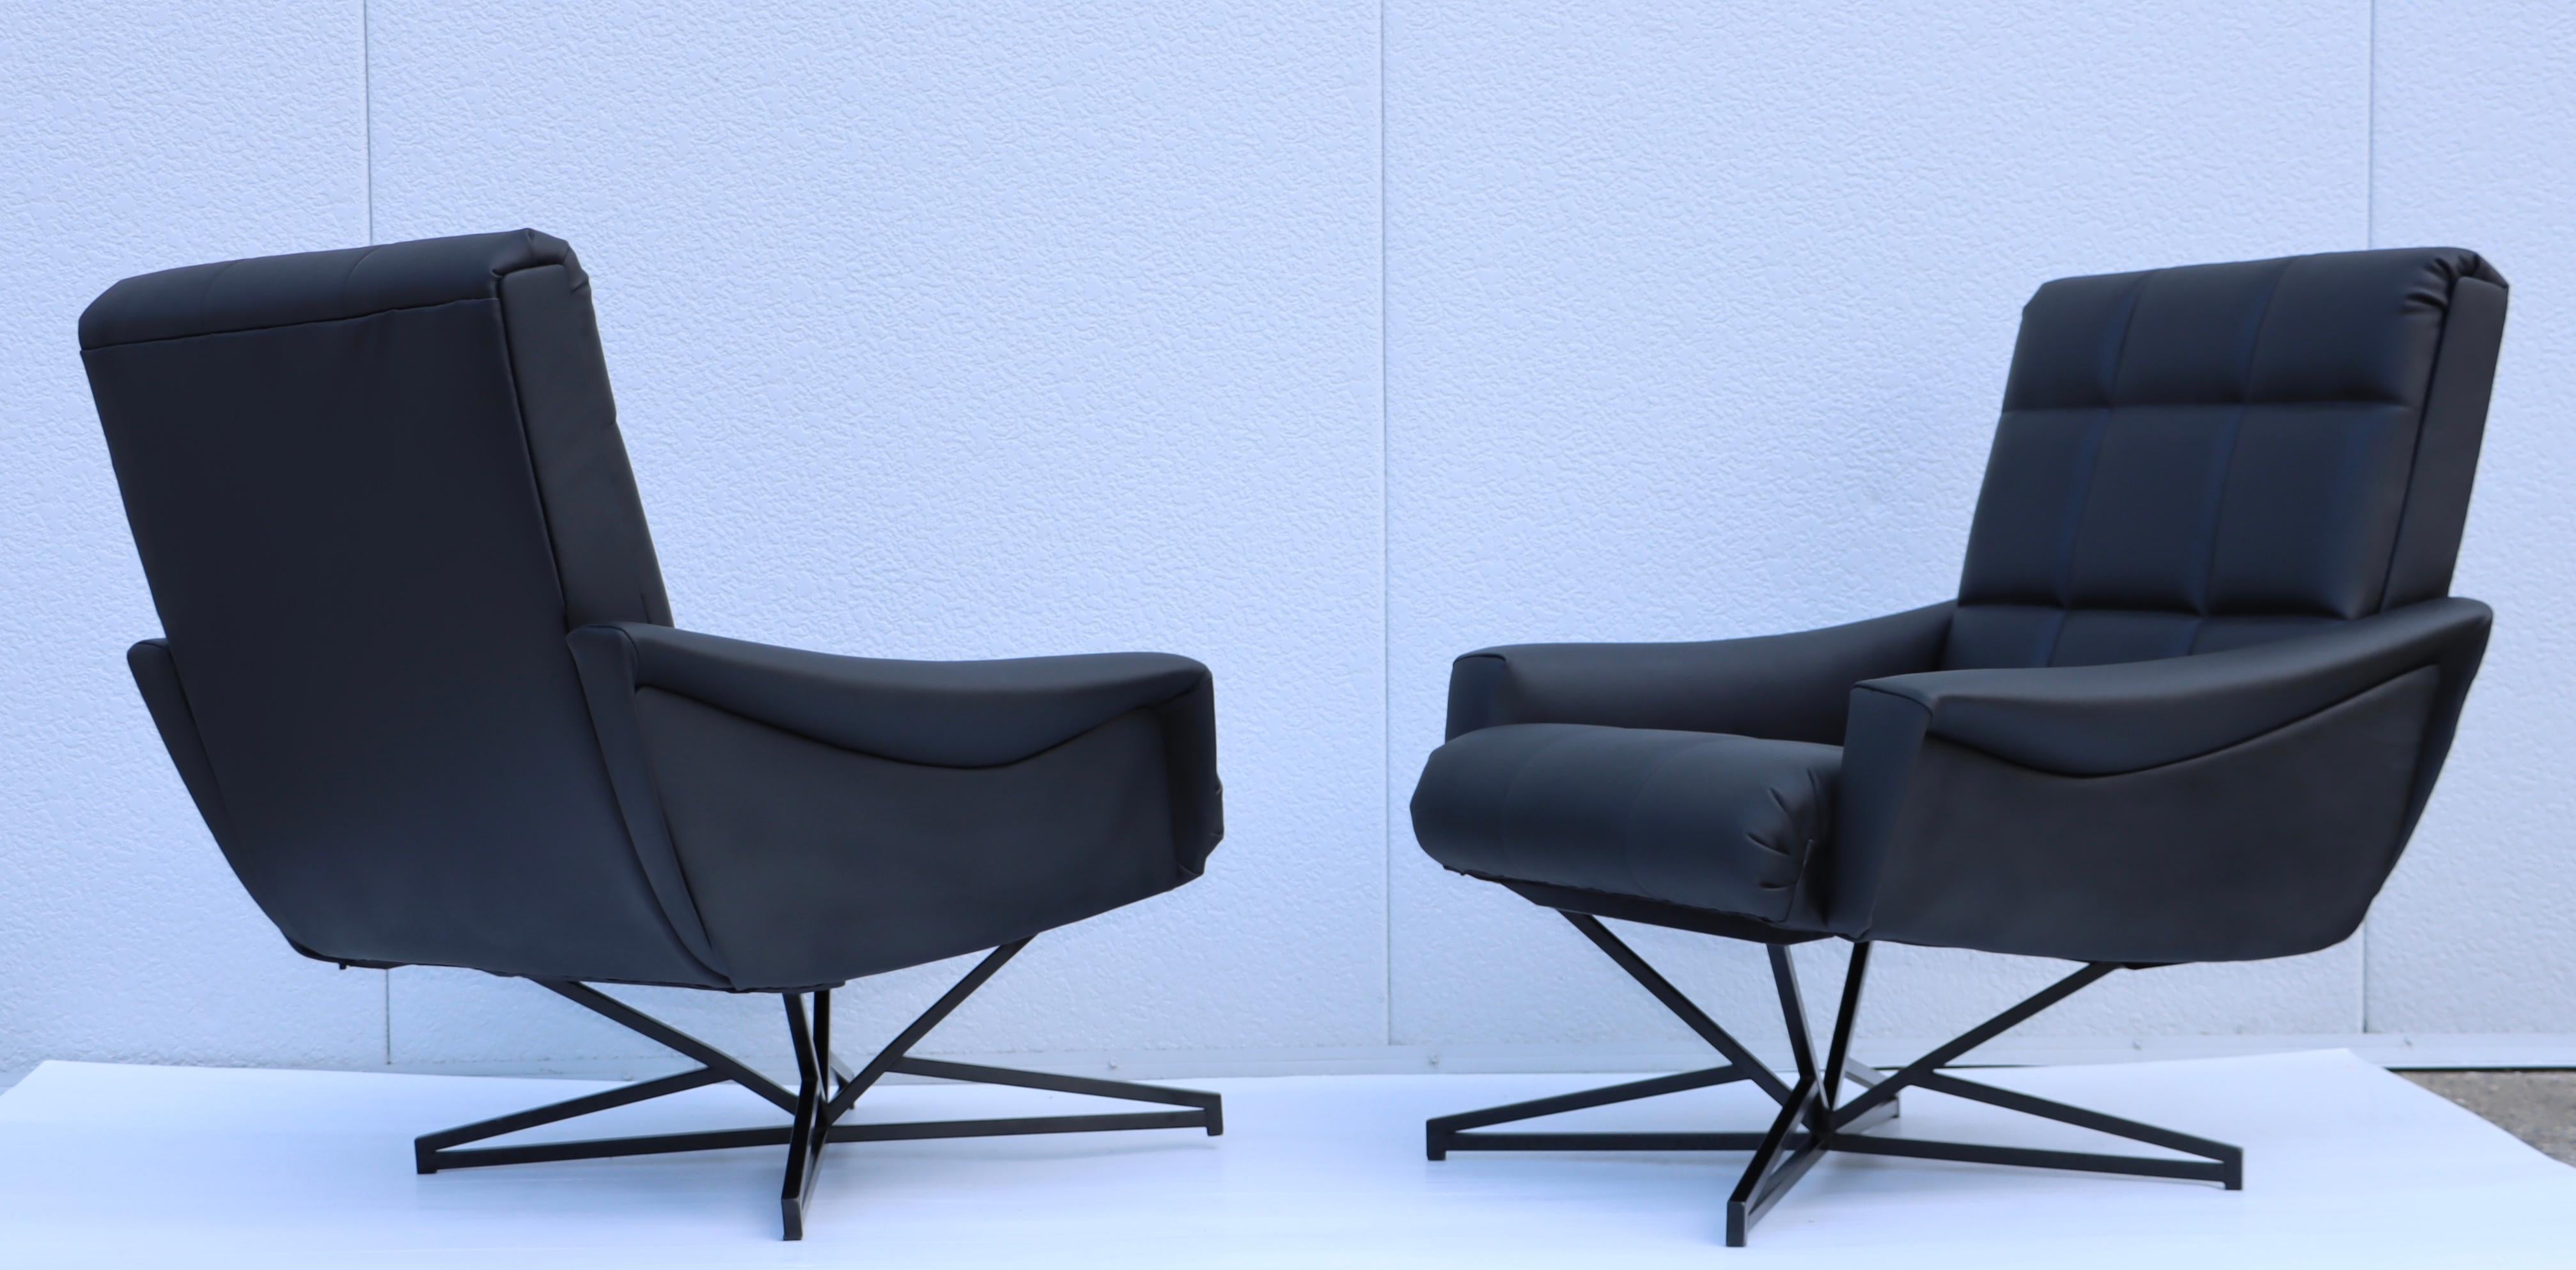 Stunning pair of 1960's Mid-Century Modern leather upholstery with iron base lounge chairs by Forma Nova, fully restored with minor wear and patina due to age and use.